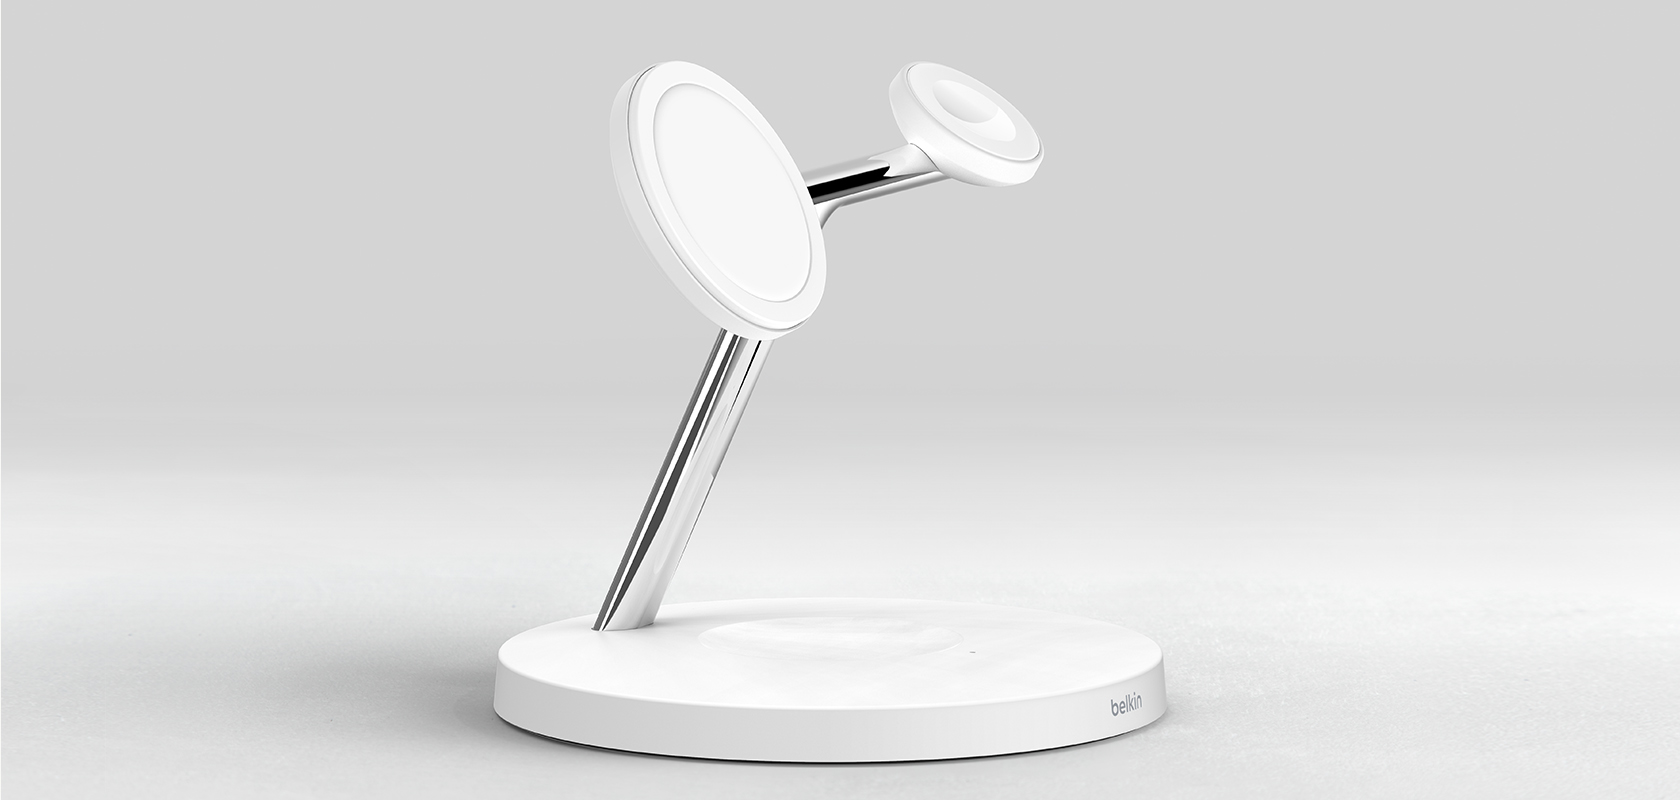 Belkin MagSafe Wireless Charger